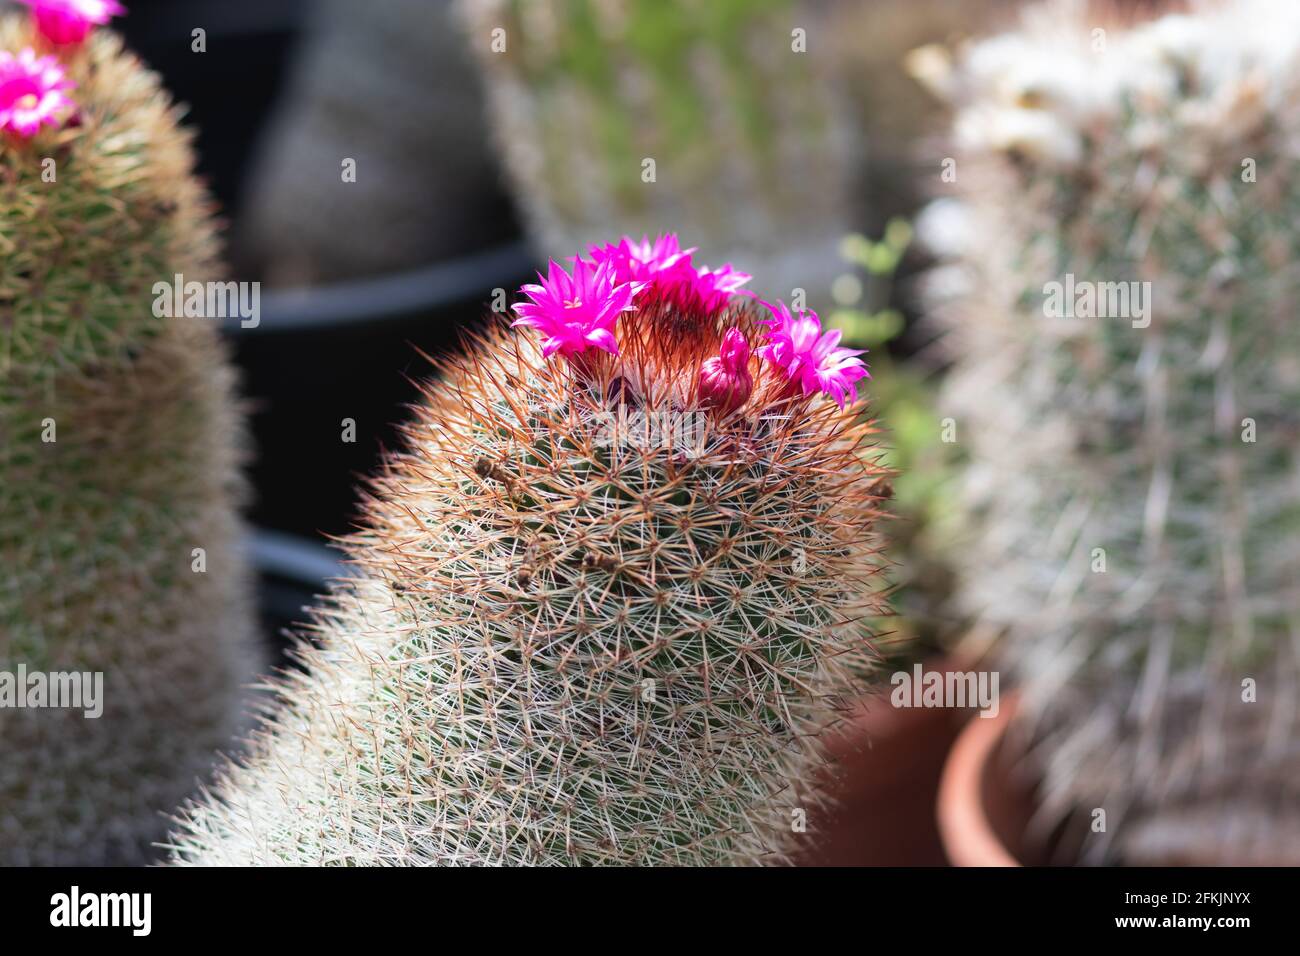 Mammillaria cactus, a special type with pink flowers, blurred background Stock Photo